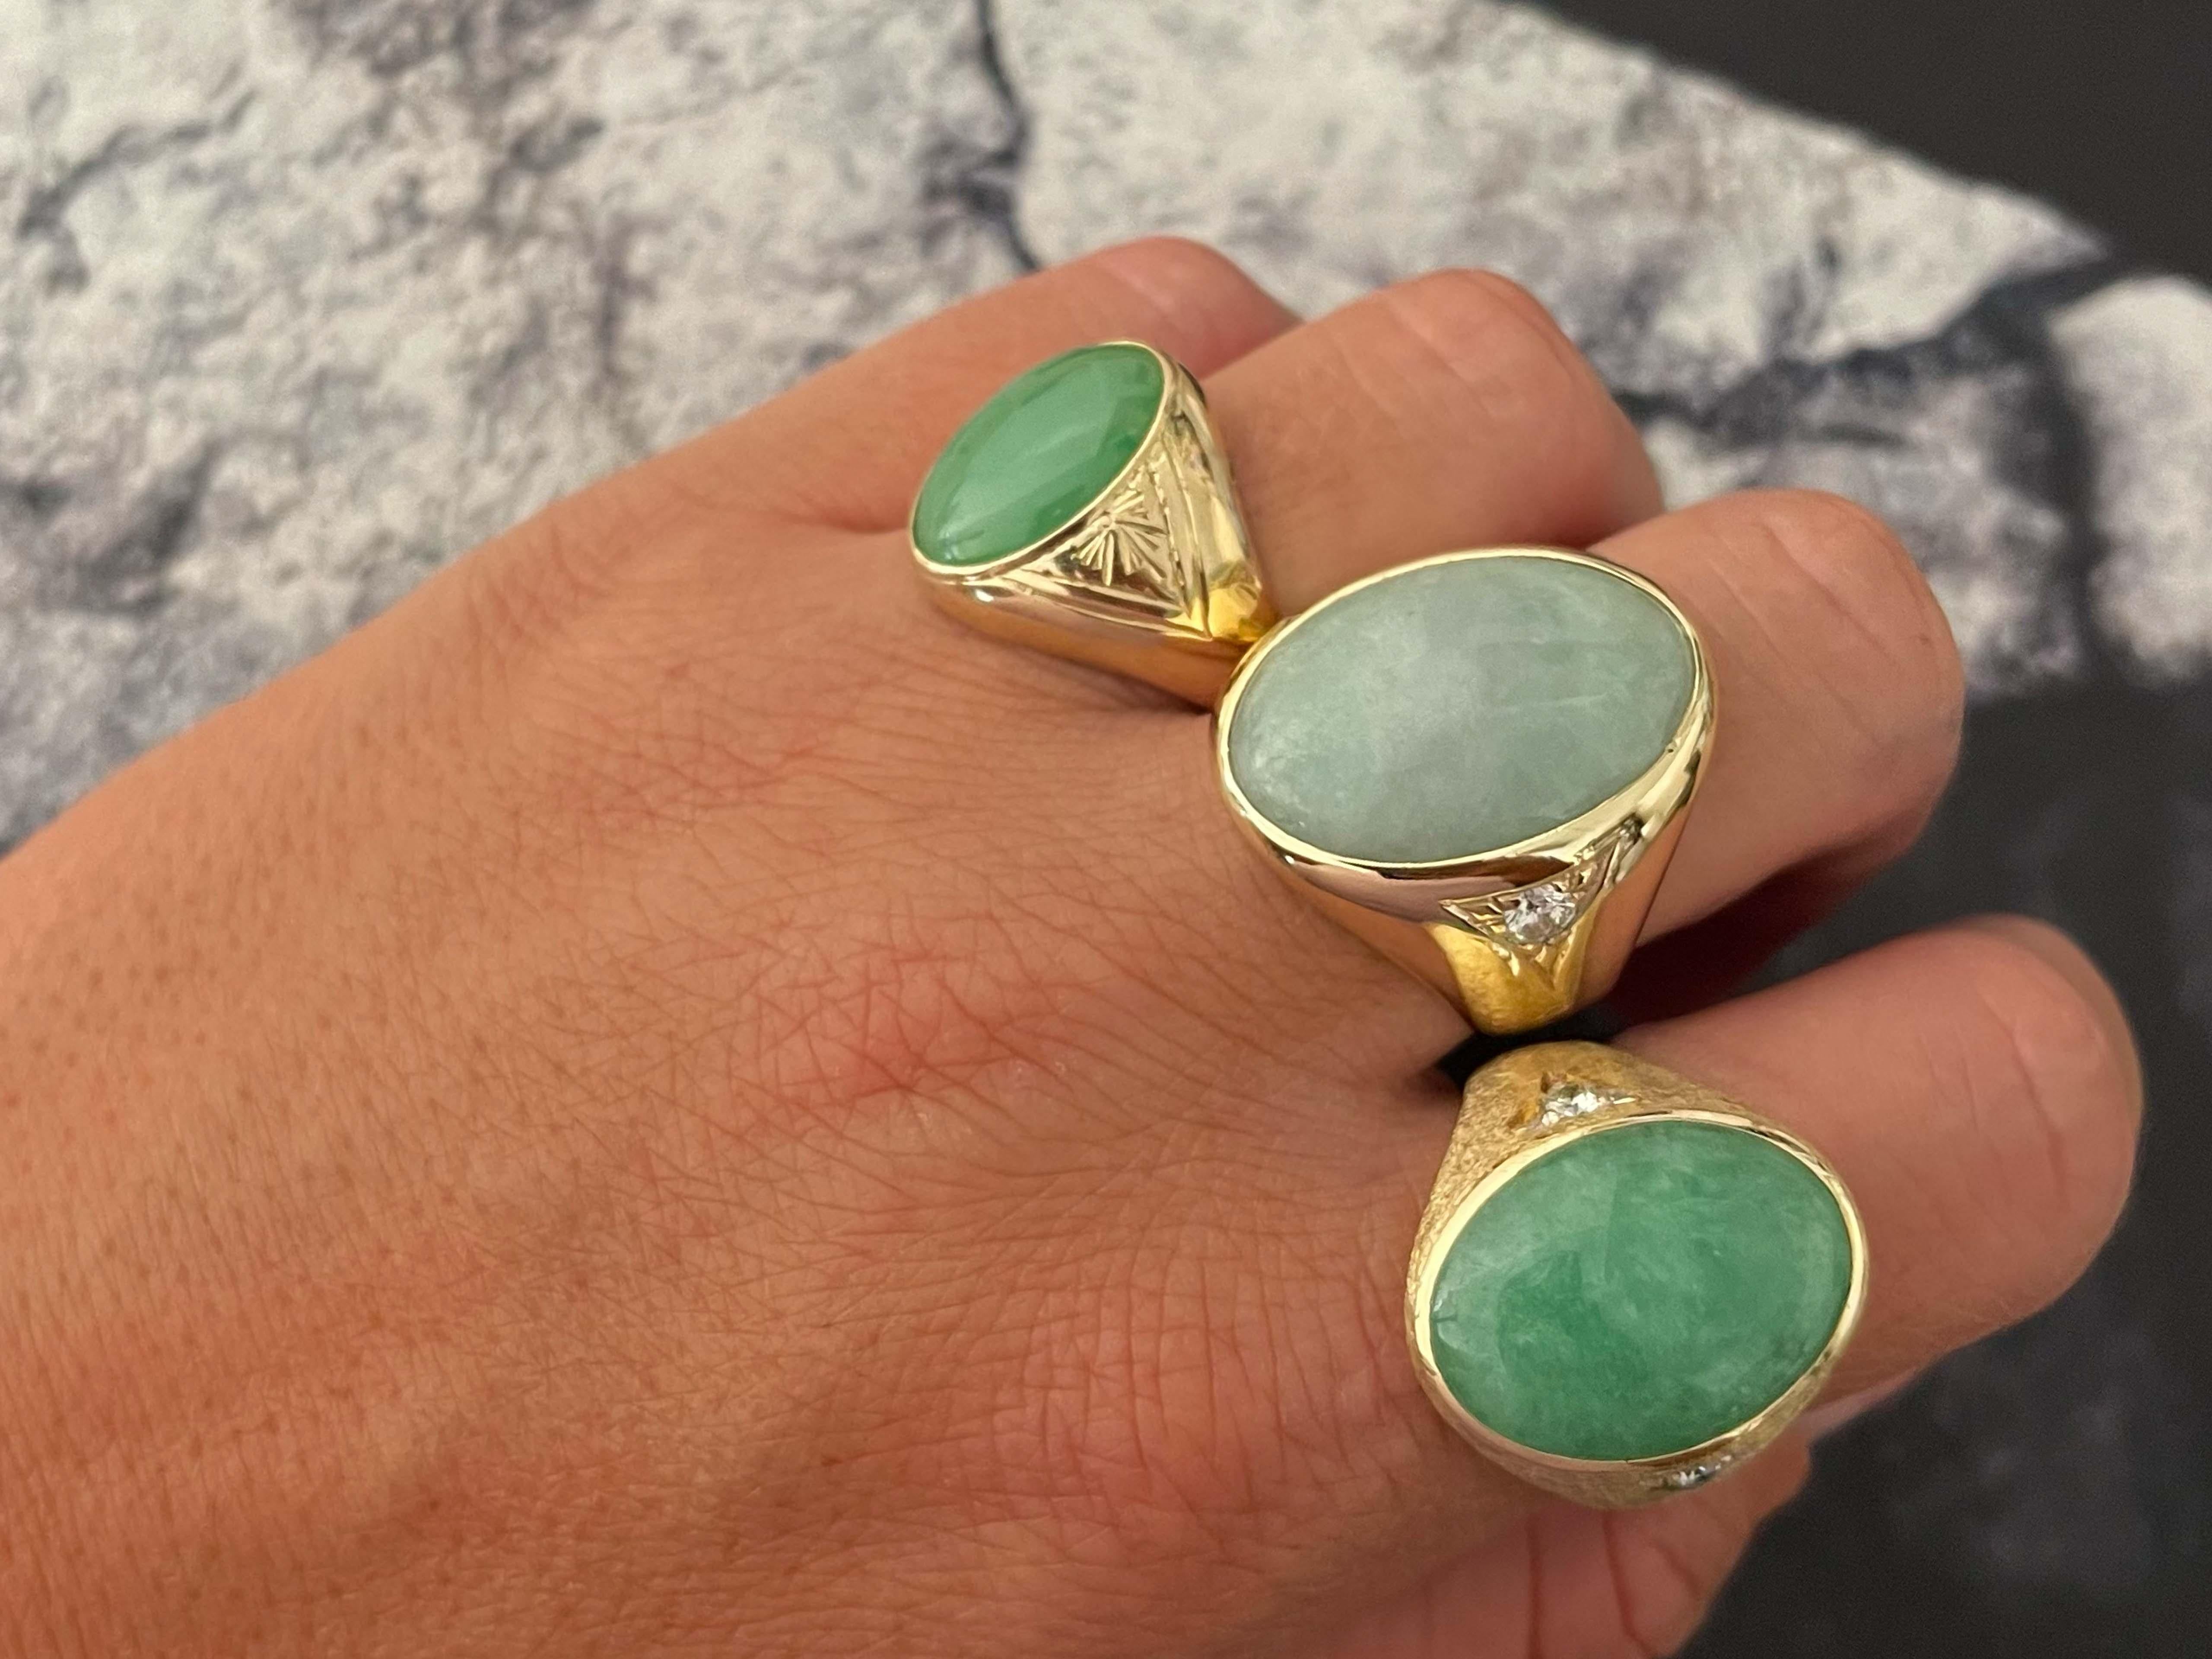 Item Specifications:

Metal: 14k Yellow Gold 

Style: Statement Ring

Ring Size: 9.75 (resizing available for a fee)

Total Weight: 14.4 Grams

Gemstone Specifications:

Center Gemstone: Jadeite Jade

Shape: Oval

Color: Green

Cut: Cabochon

Jade